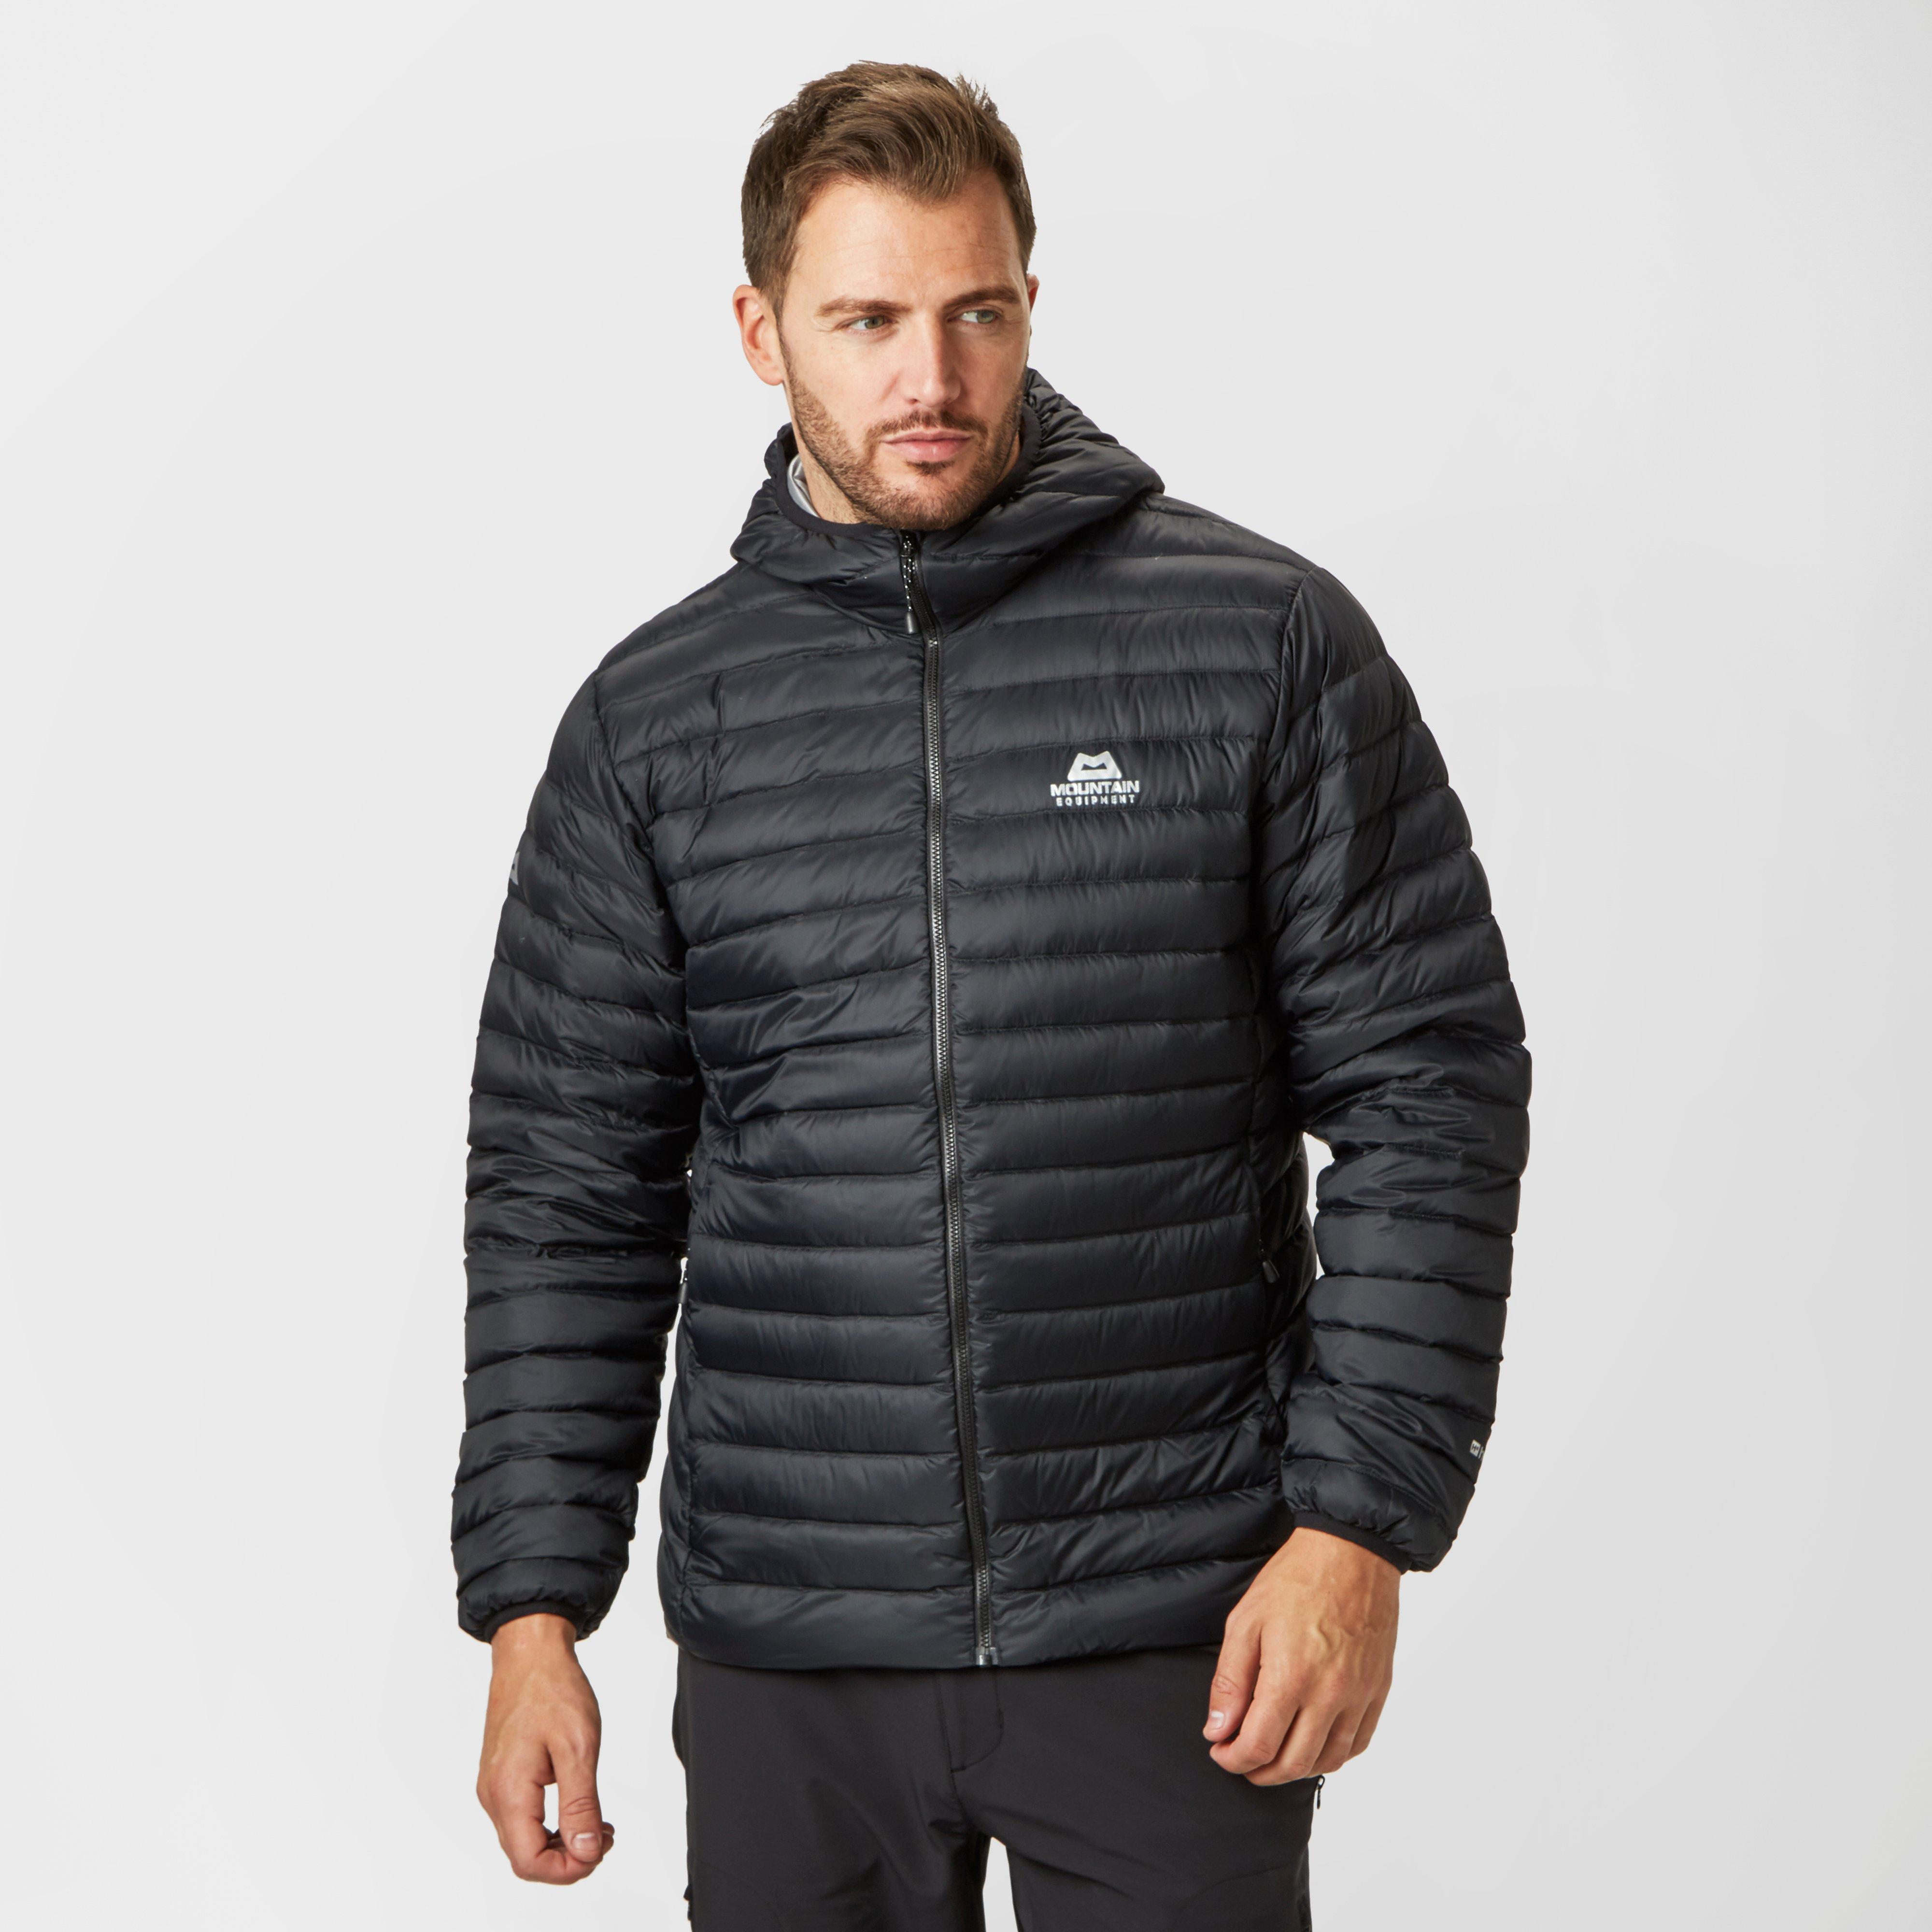 Mountain Equipment Arete Hooded Jacket – Men’s | Jacket Compare ...